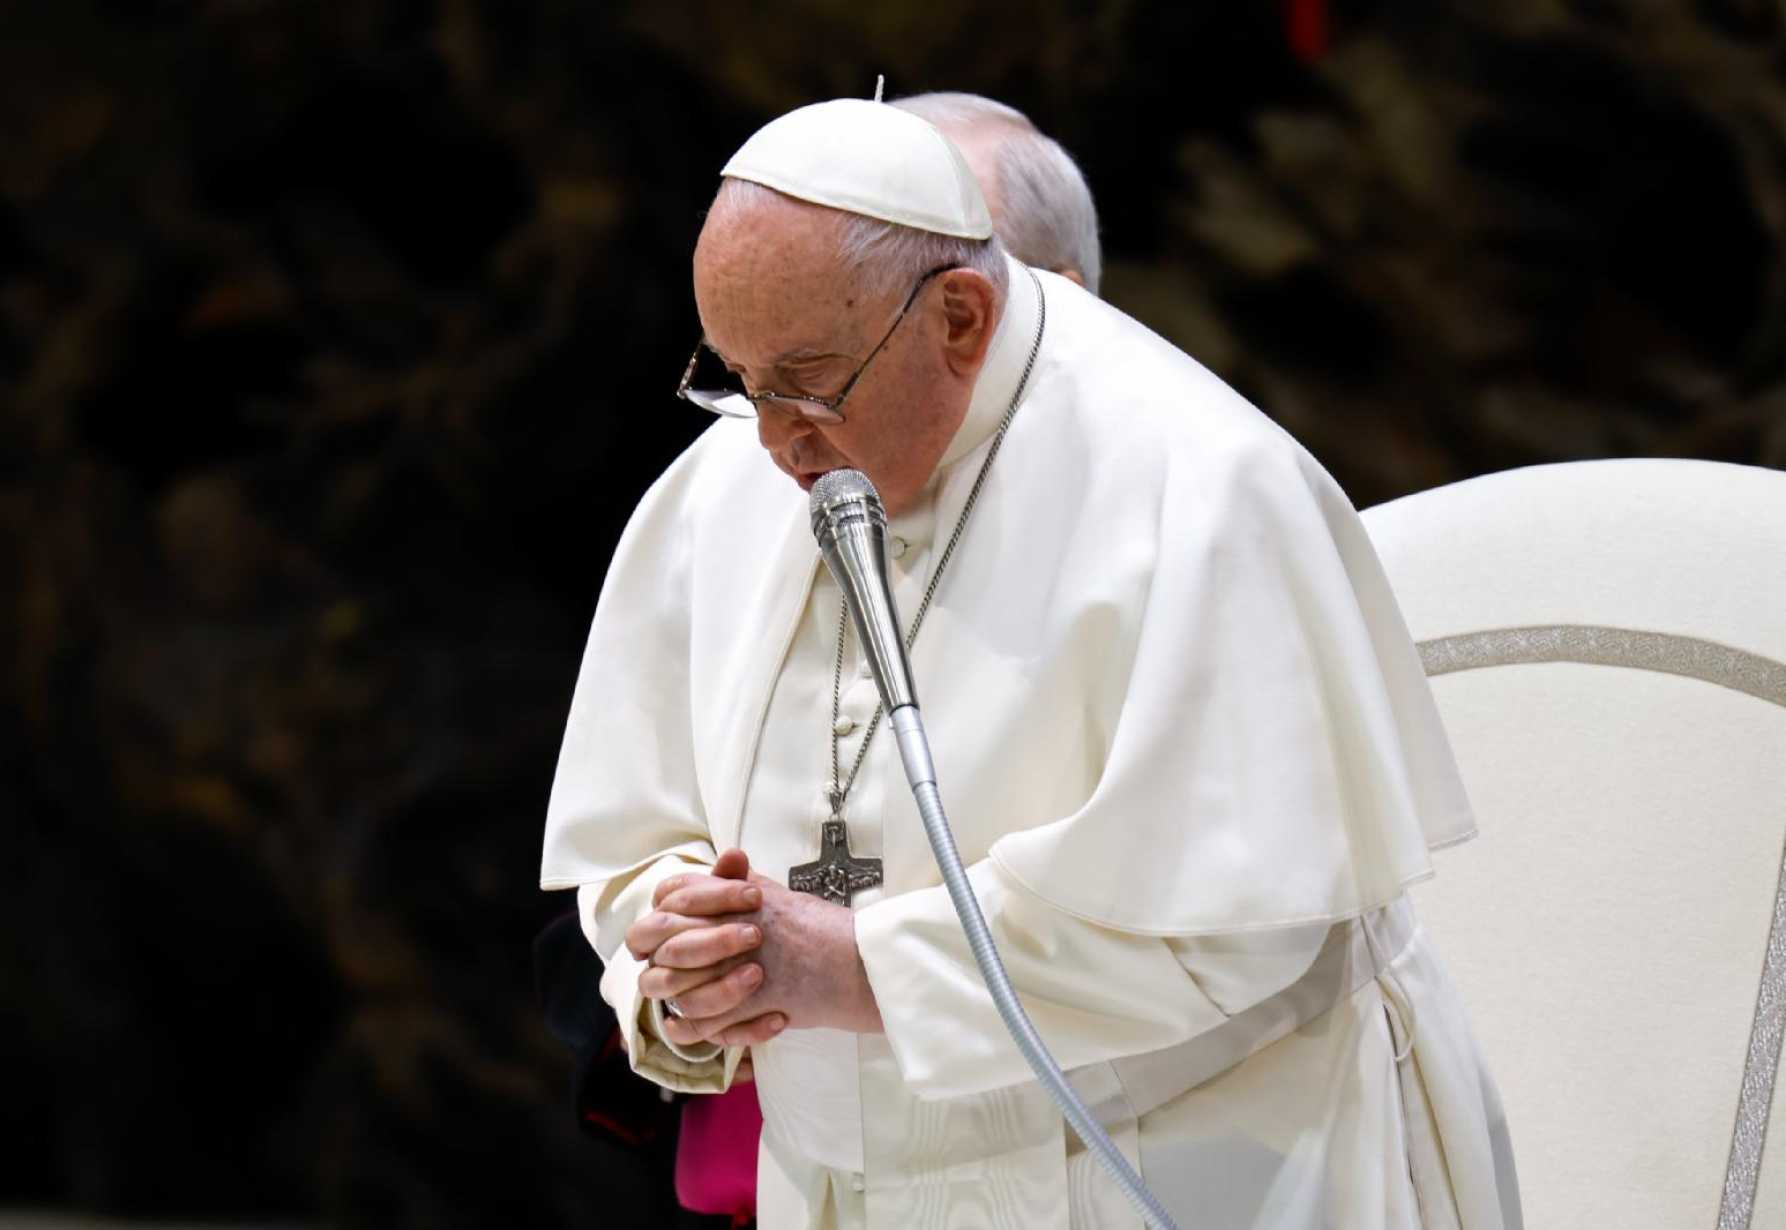 Laziness is a symptom of 'acedia,' a dangerous vice, pope says